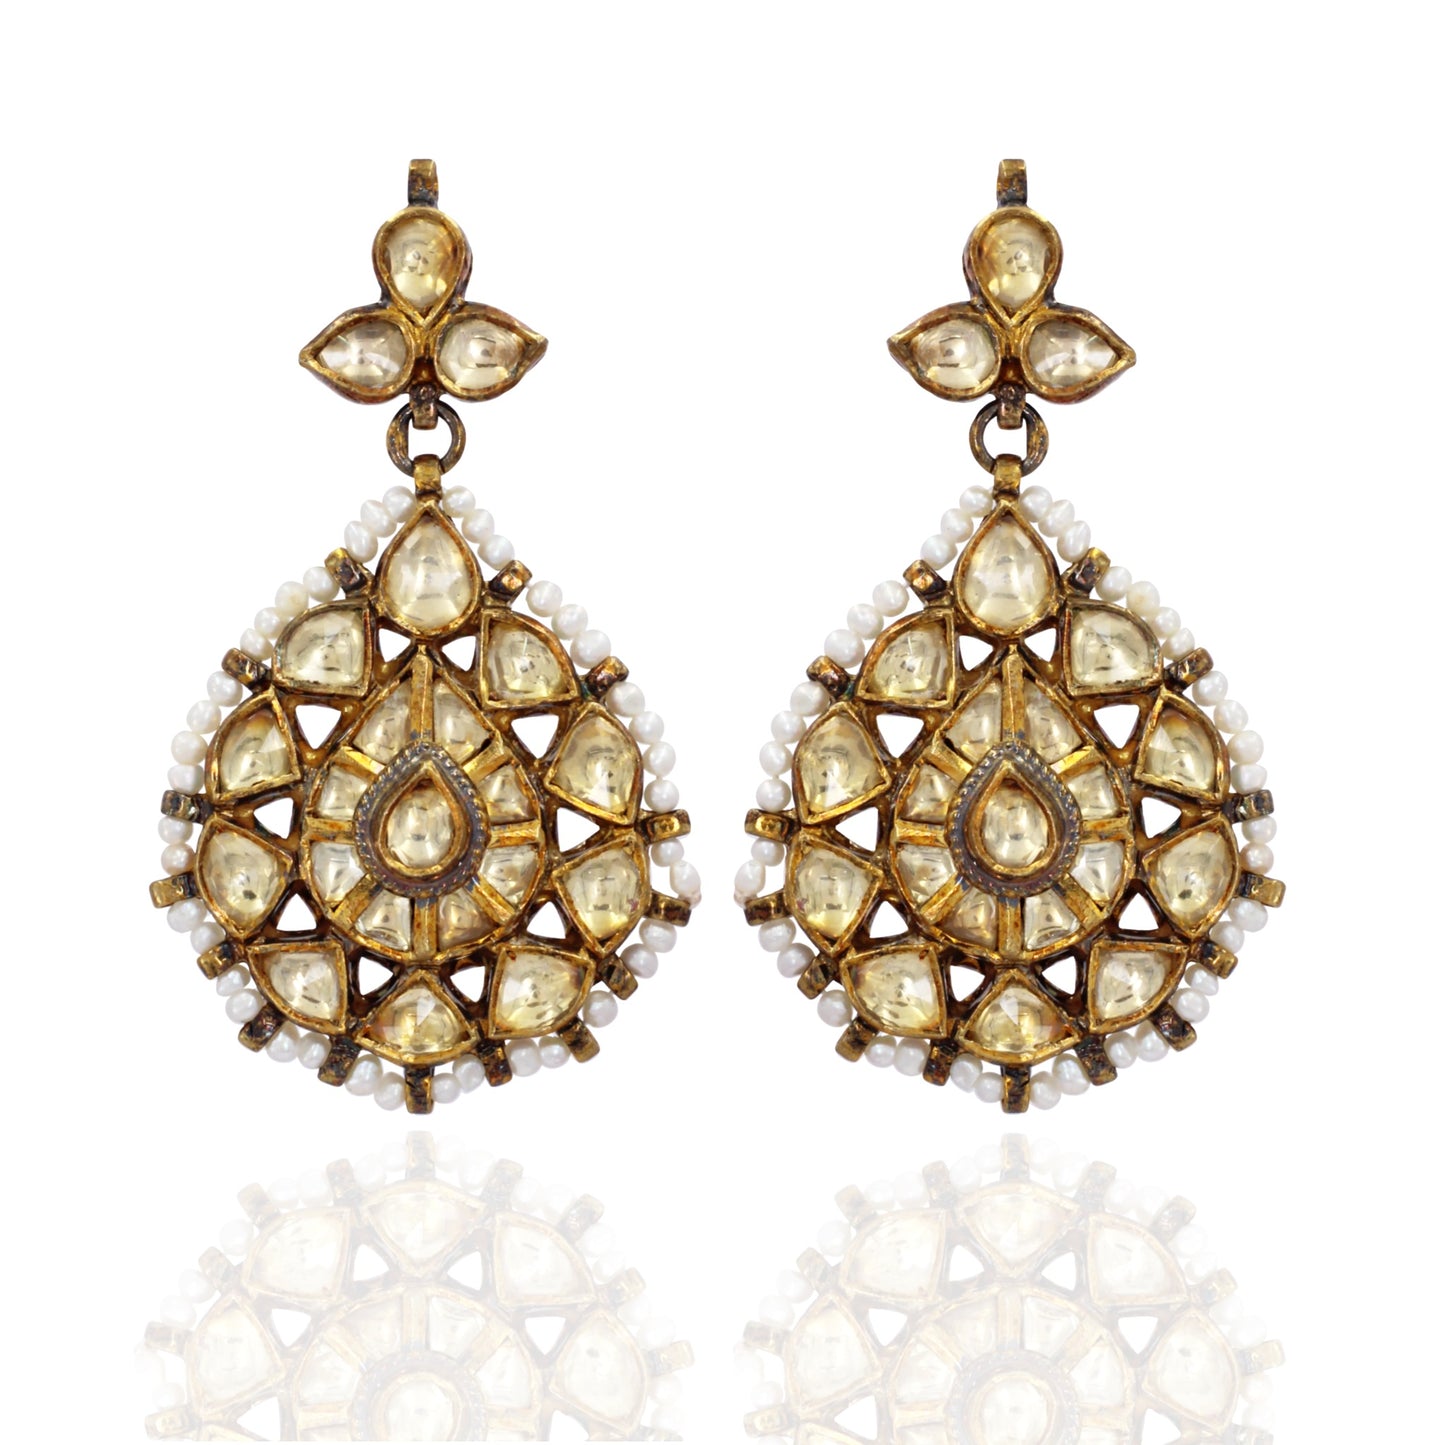 Attractive Gold Hint Of White Earrings - Titli